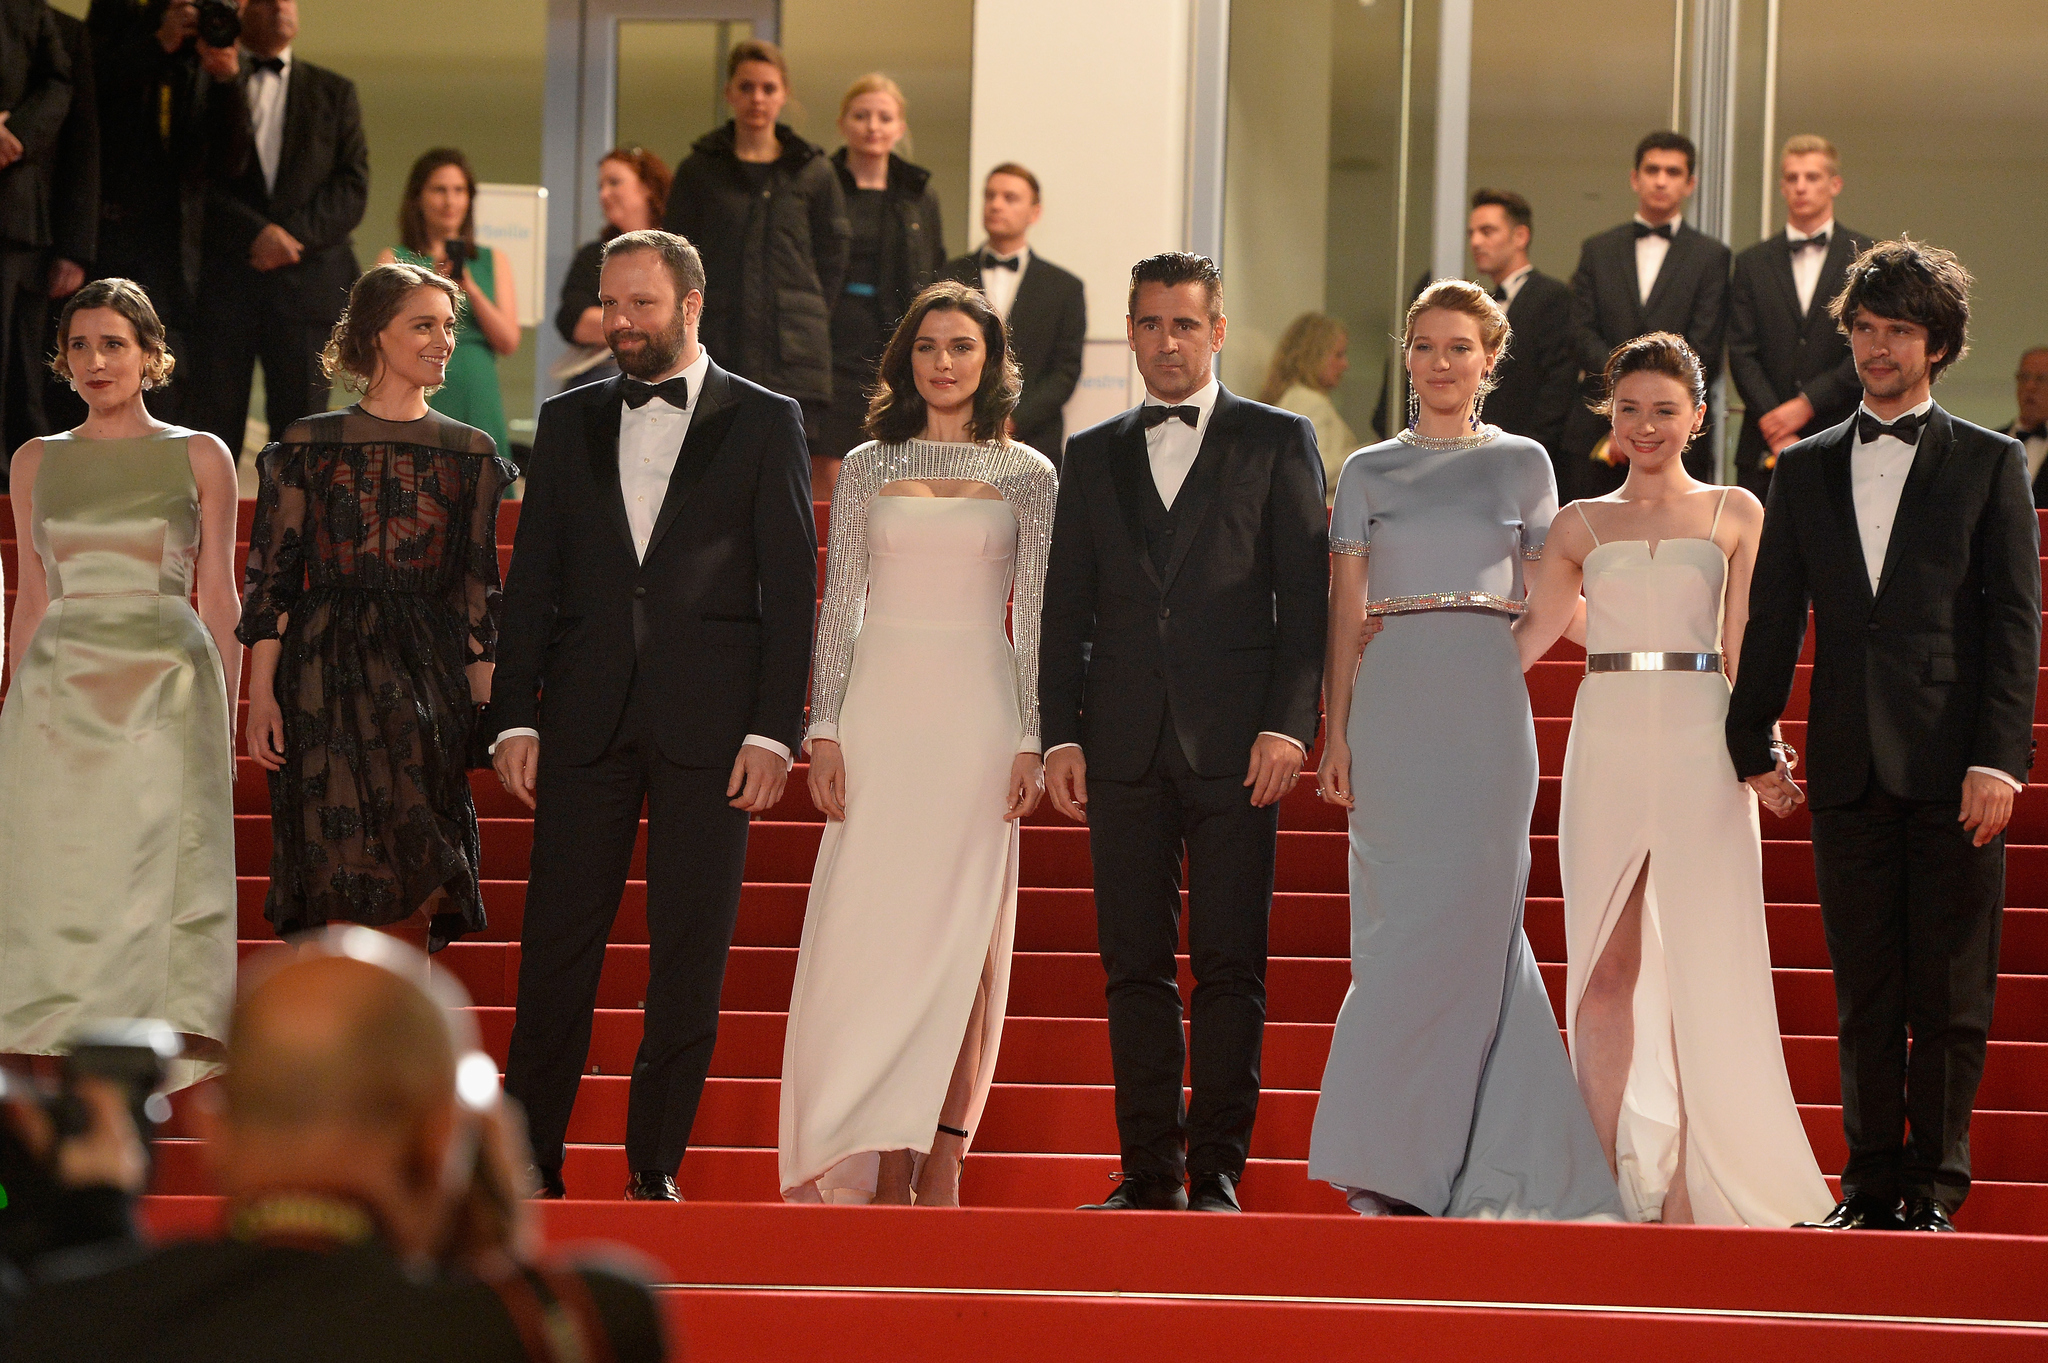 Rachel Weisz, Colin Farrell, Yorgos Lanthimos, Ben Whishaw, Angeliki Papoulia, Jessica Barden, Léa Seydoux and Ariane Labed at event of The Lobster (2015)